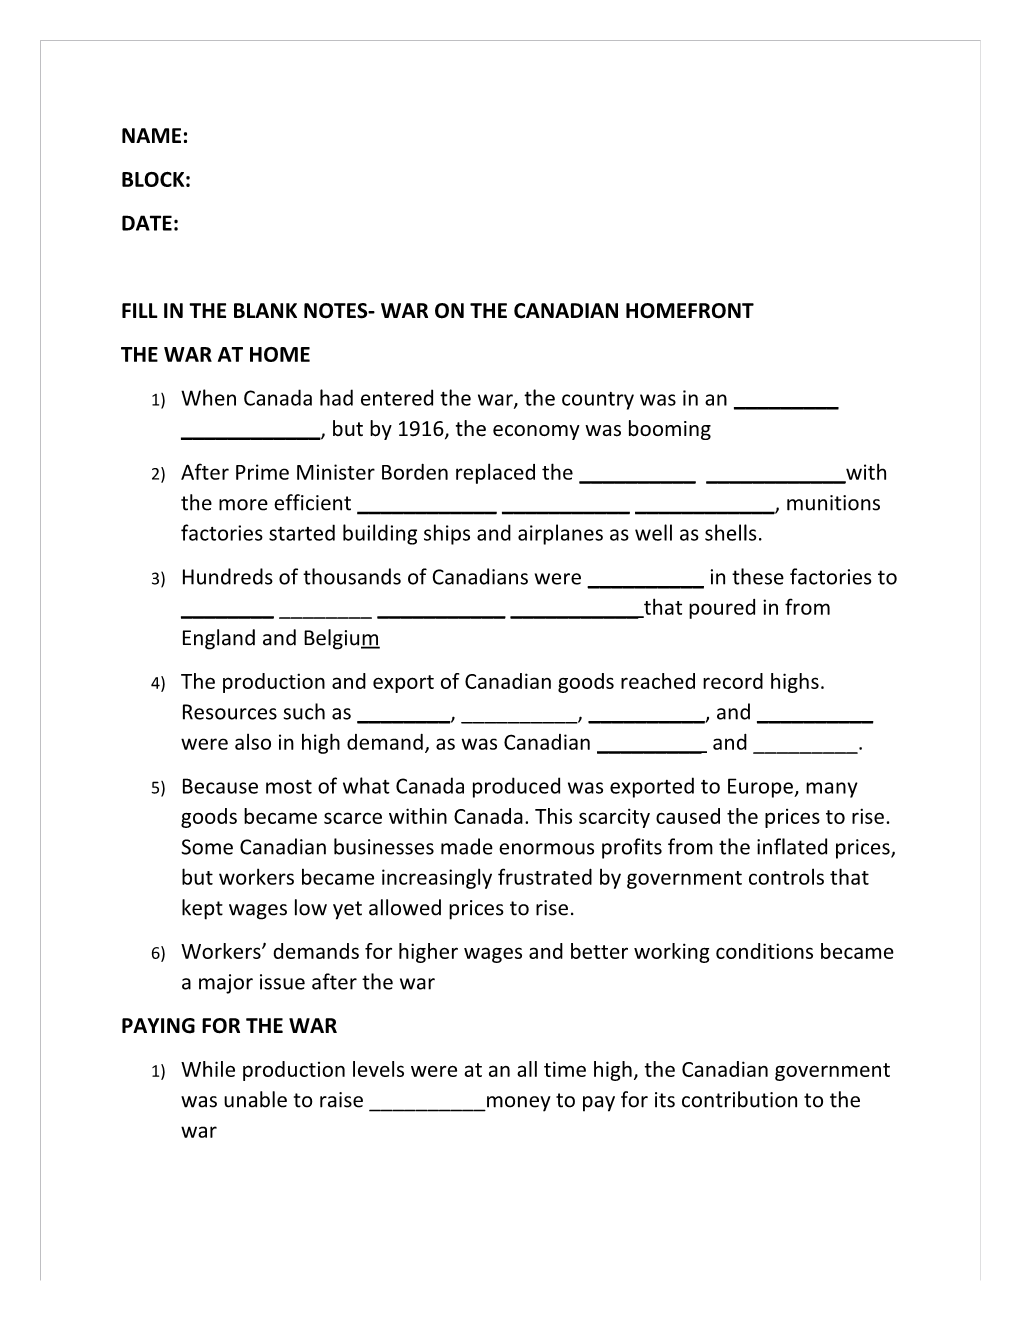 Fill in the Blank Notes- War on the Canadian Homefront